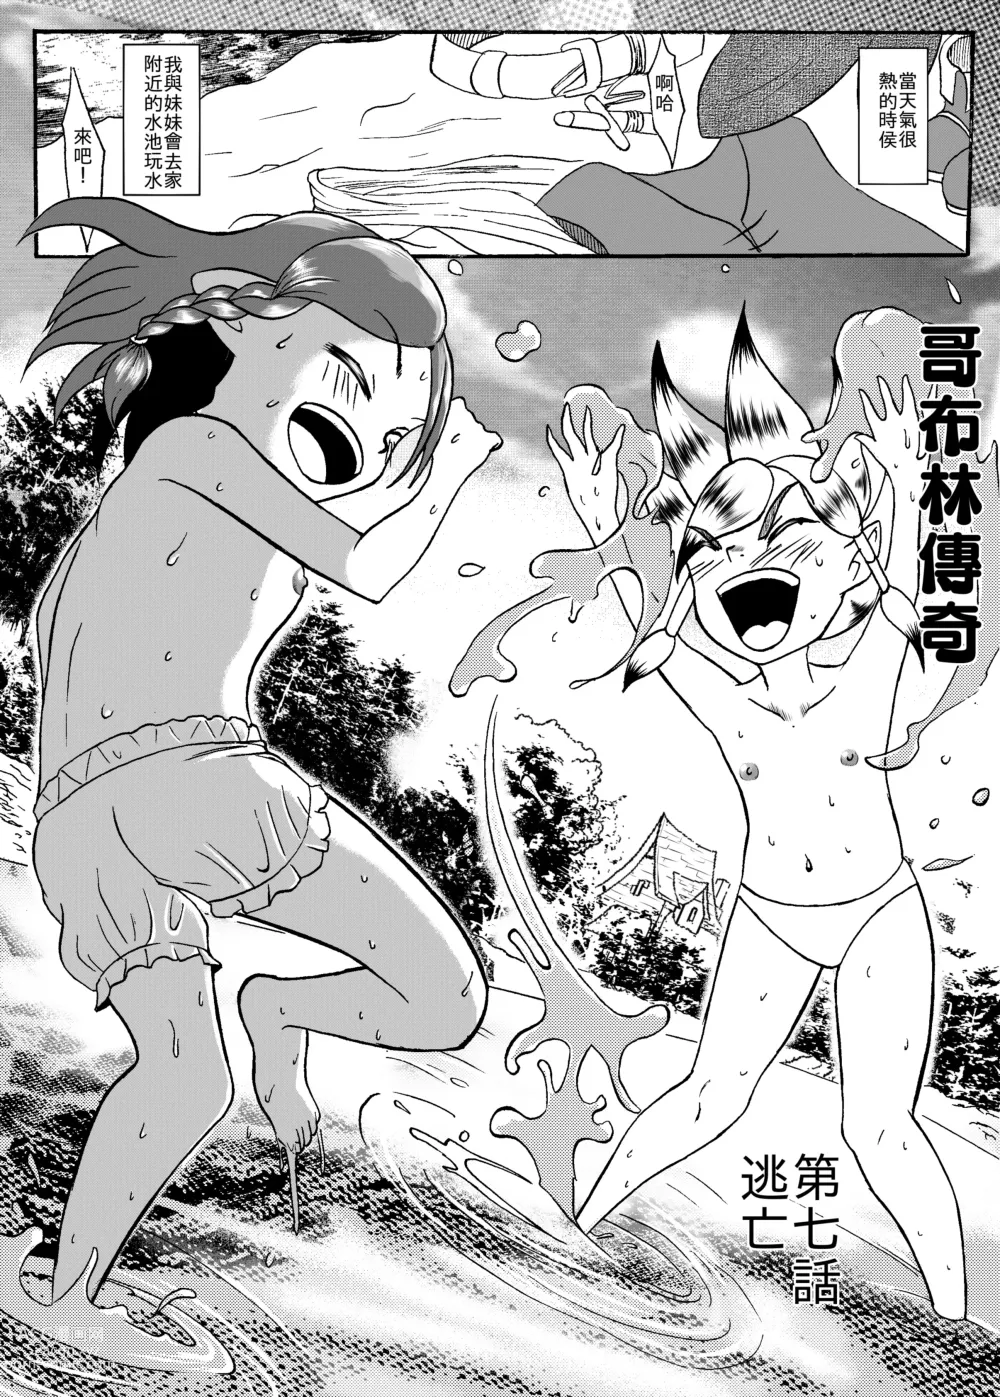 Page 1 of manga 哥布林傳奇7 Goblin Legend Chapter